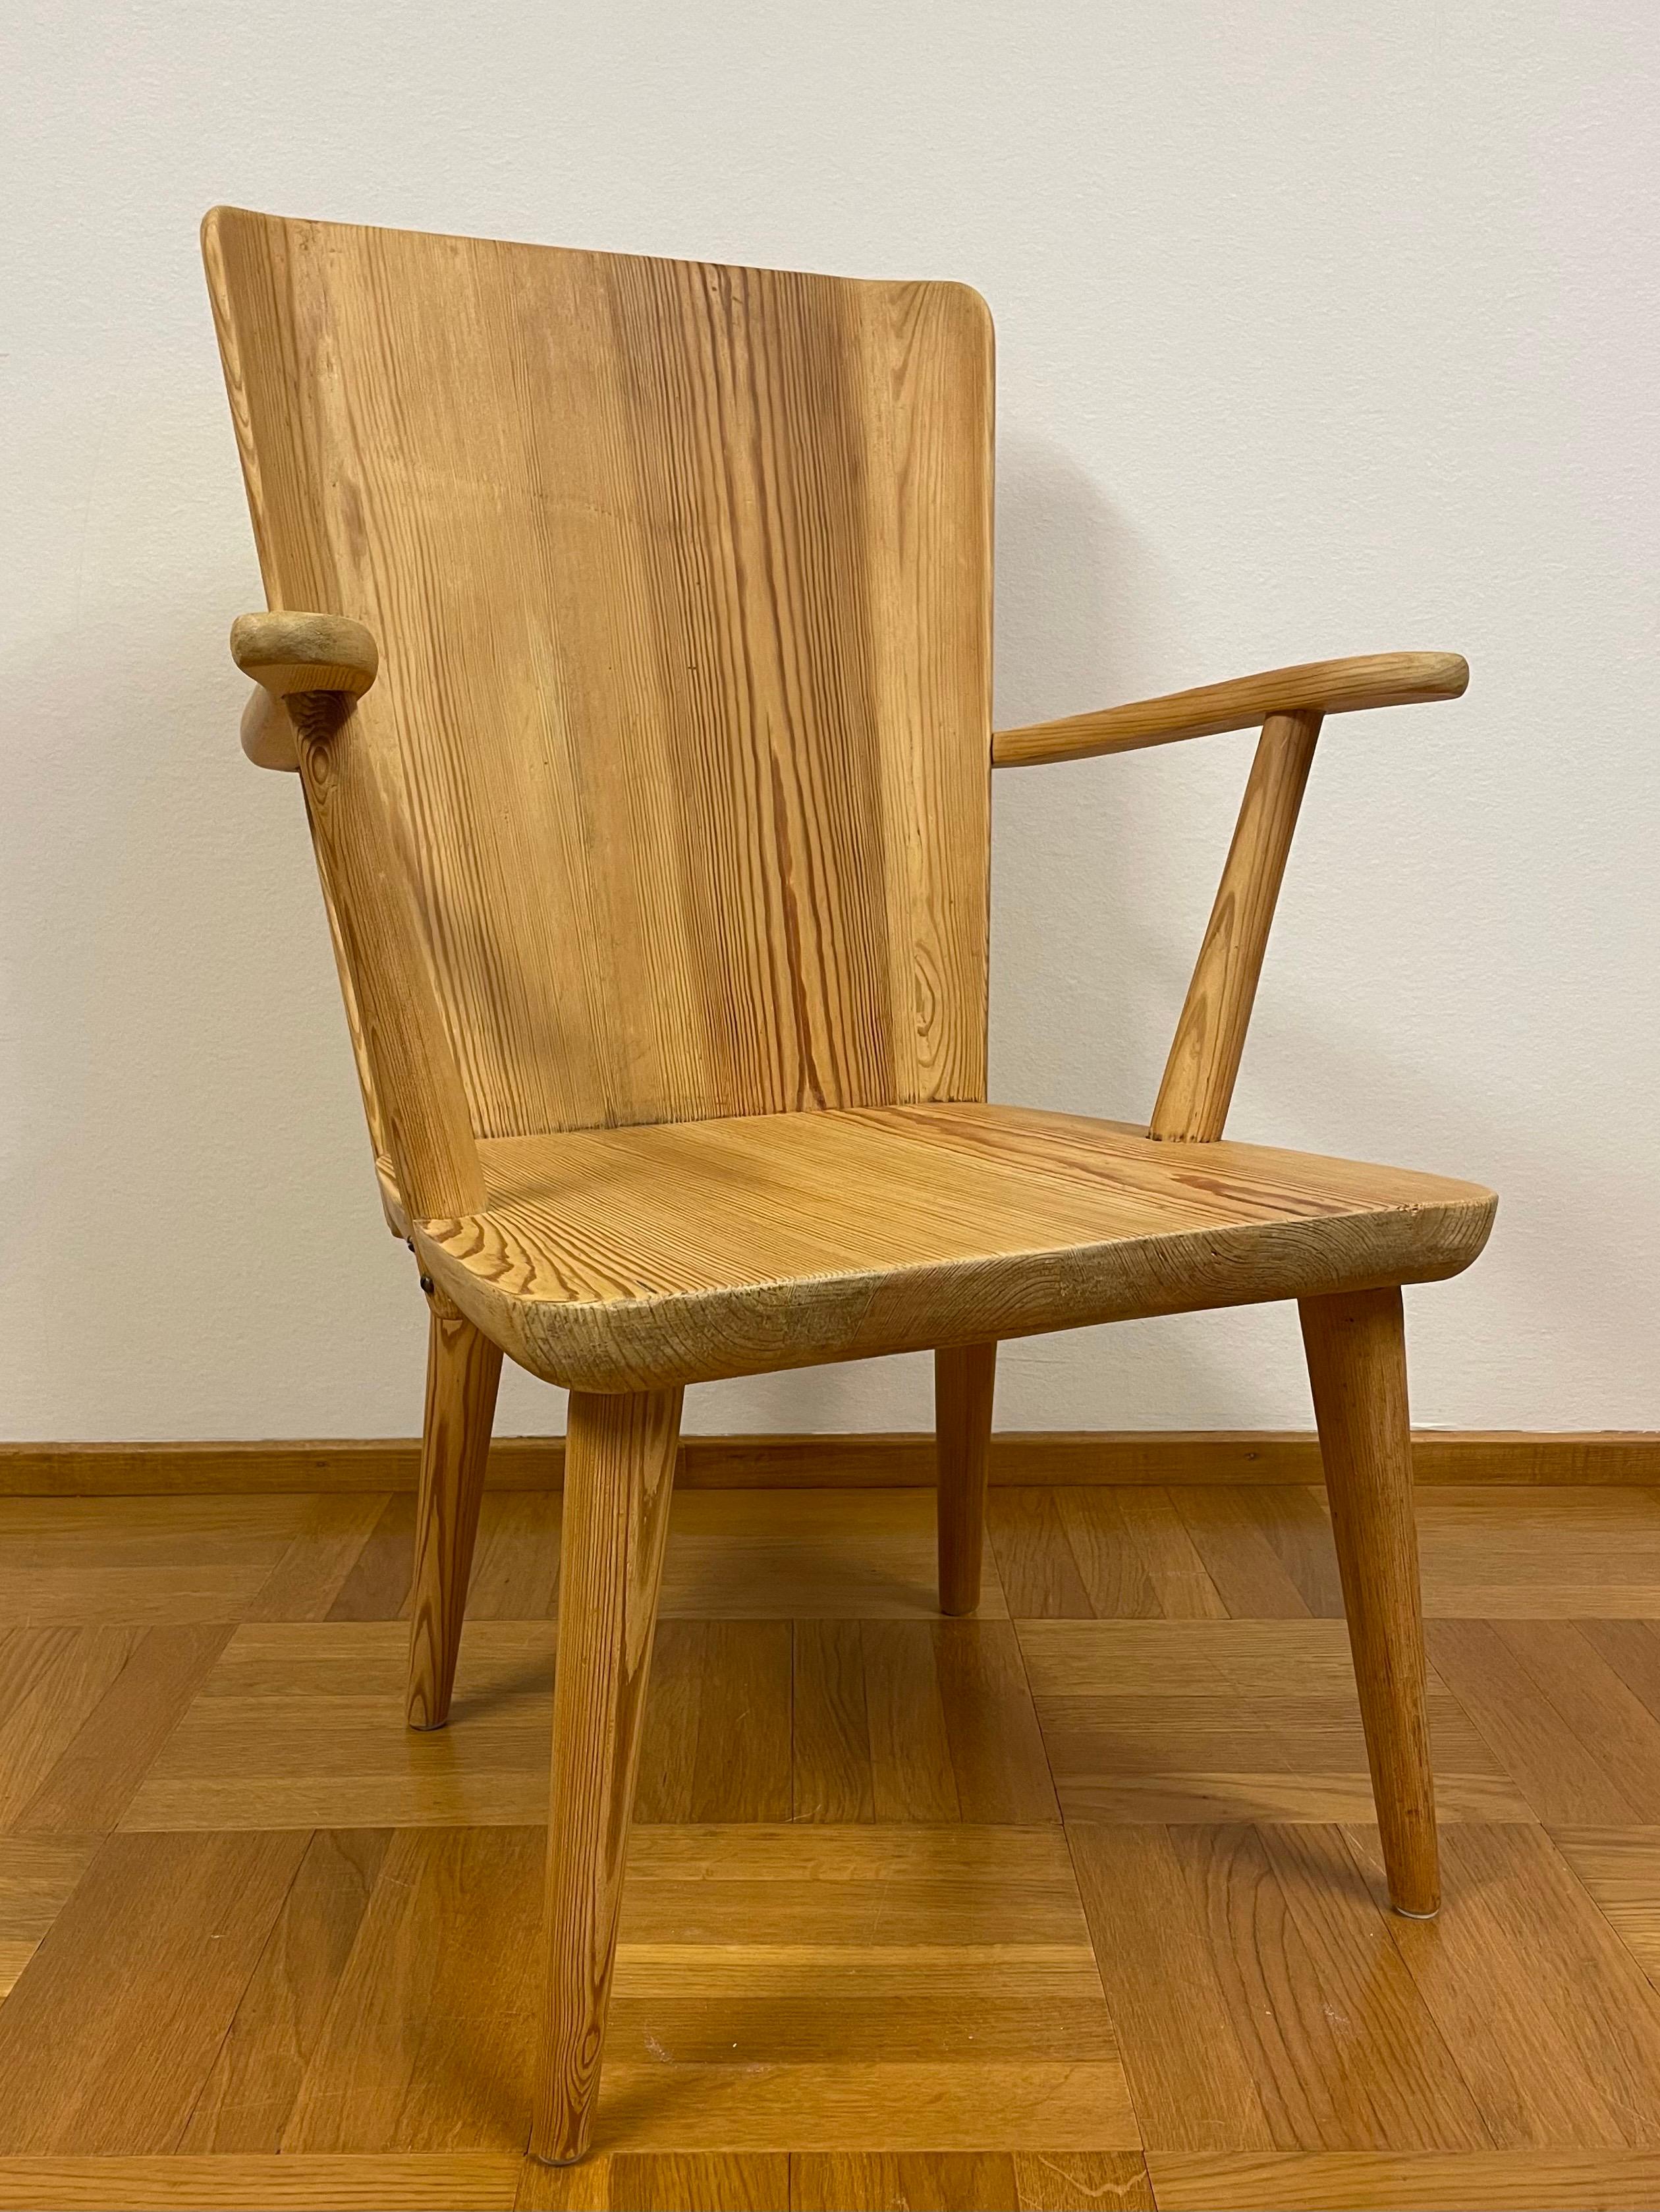 1940s Swedish Pine Armchair by Göran Malmvall for Karl Andersson & Söner  In Good Condition For Sale In Örebro, SE